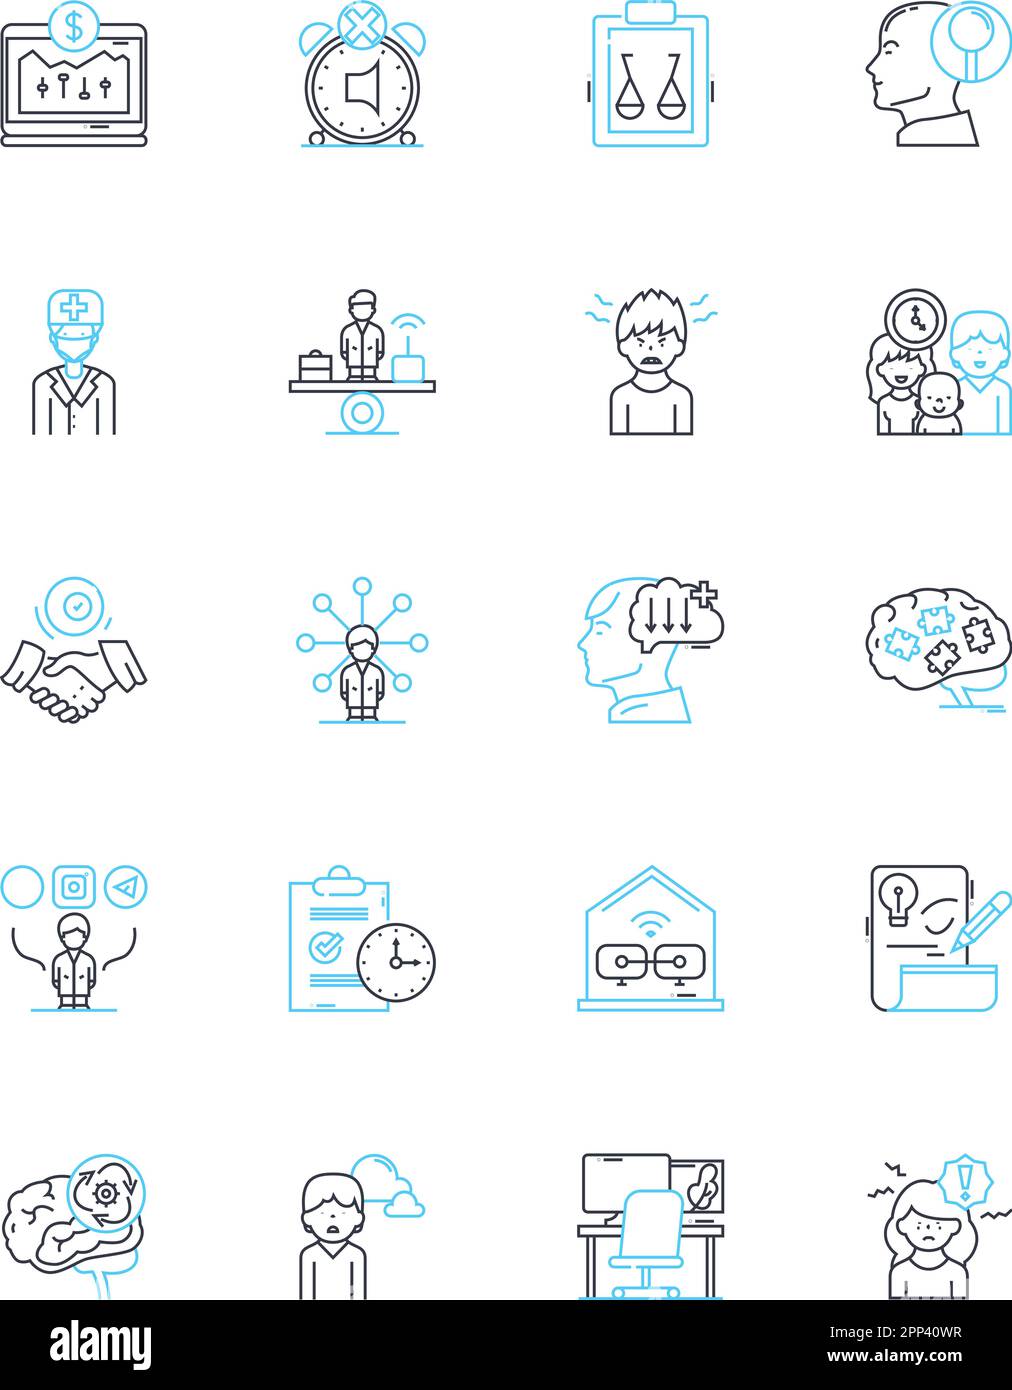 Work efficiency linear icons set. Productivity, Time-management, Multitasking, Focus, Organization, Prioritization, Streamlining line vector and Stock Vector